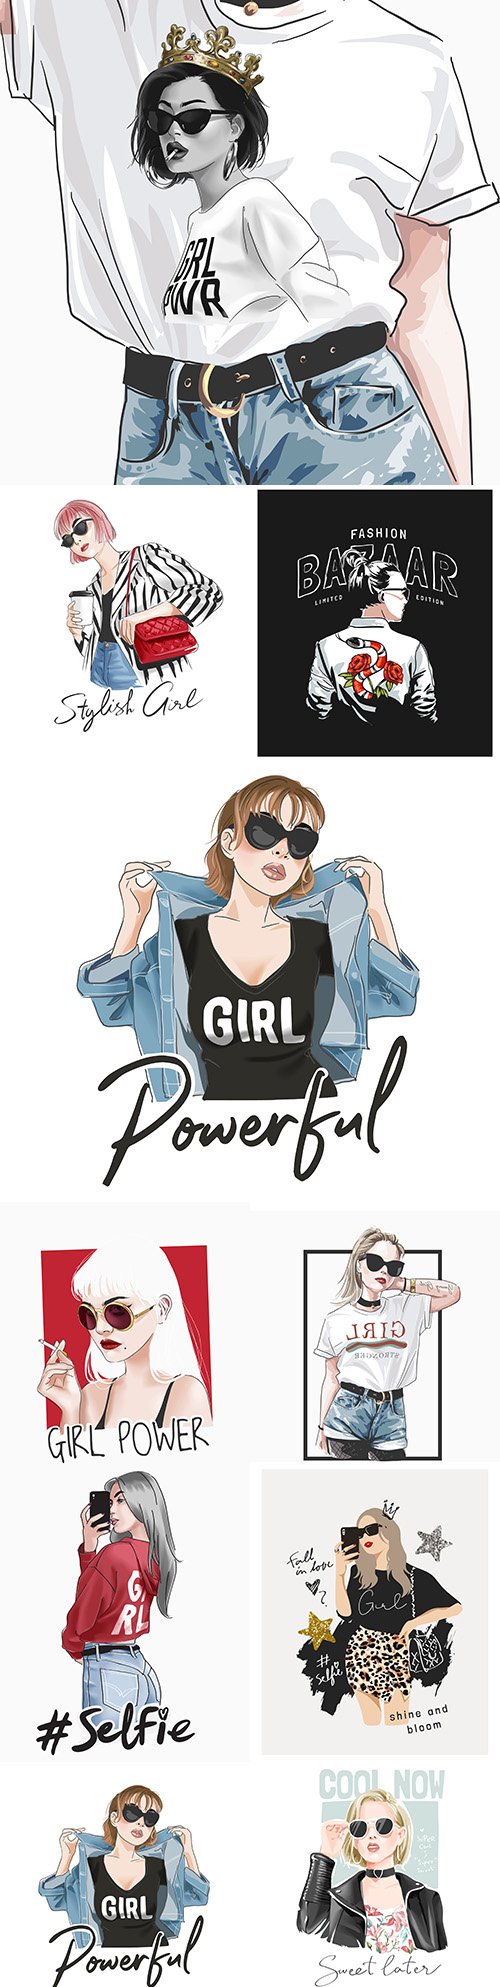 Stylish girl in glasses and trendy clothing illustrations